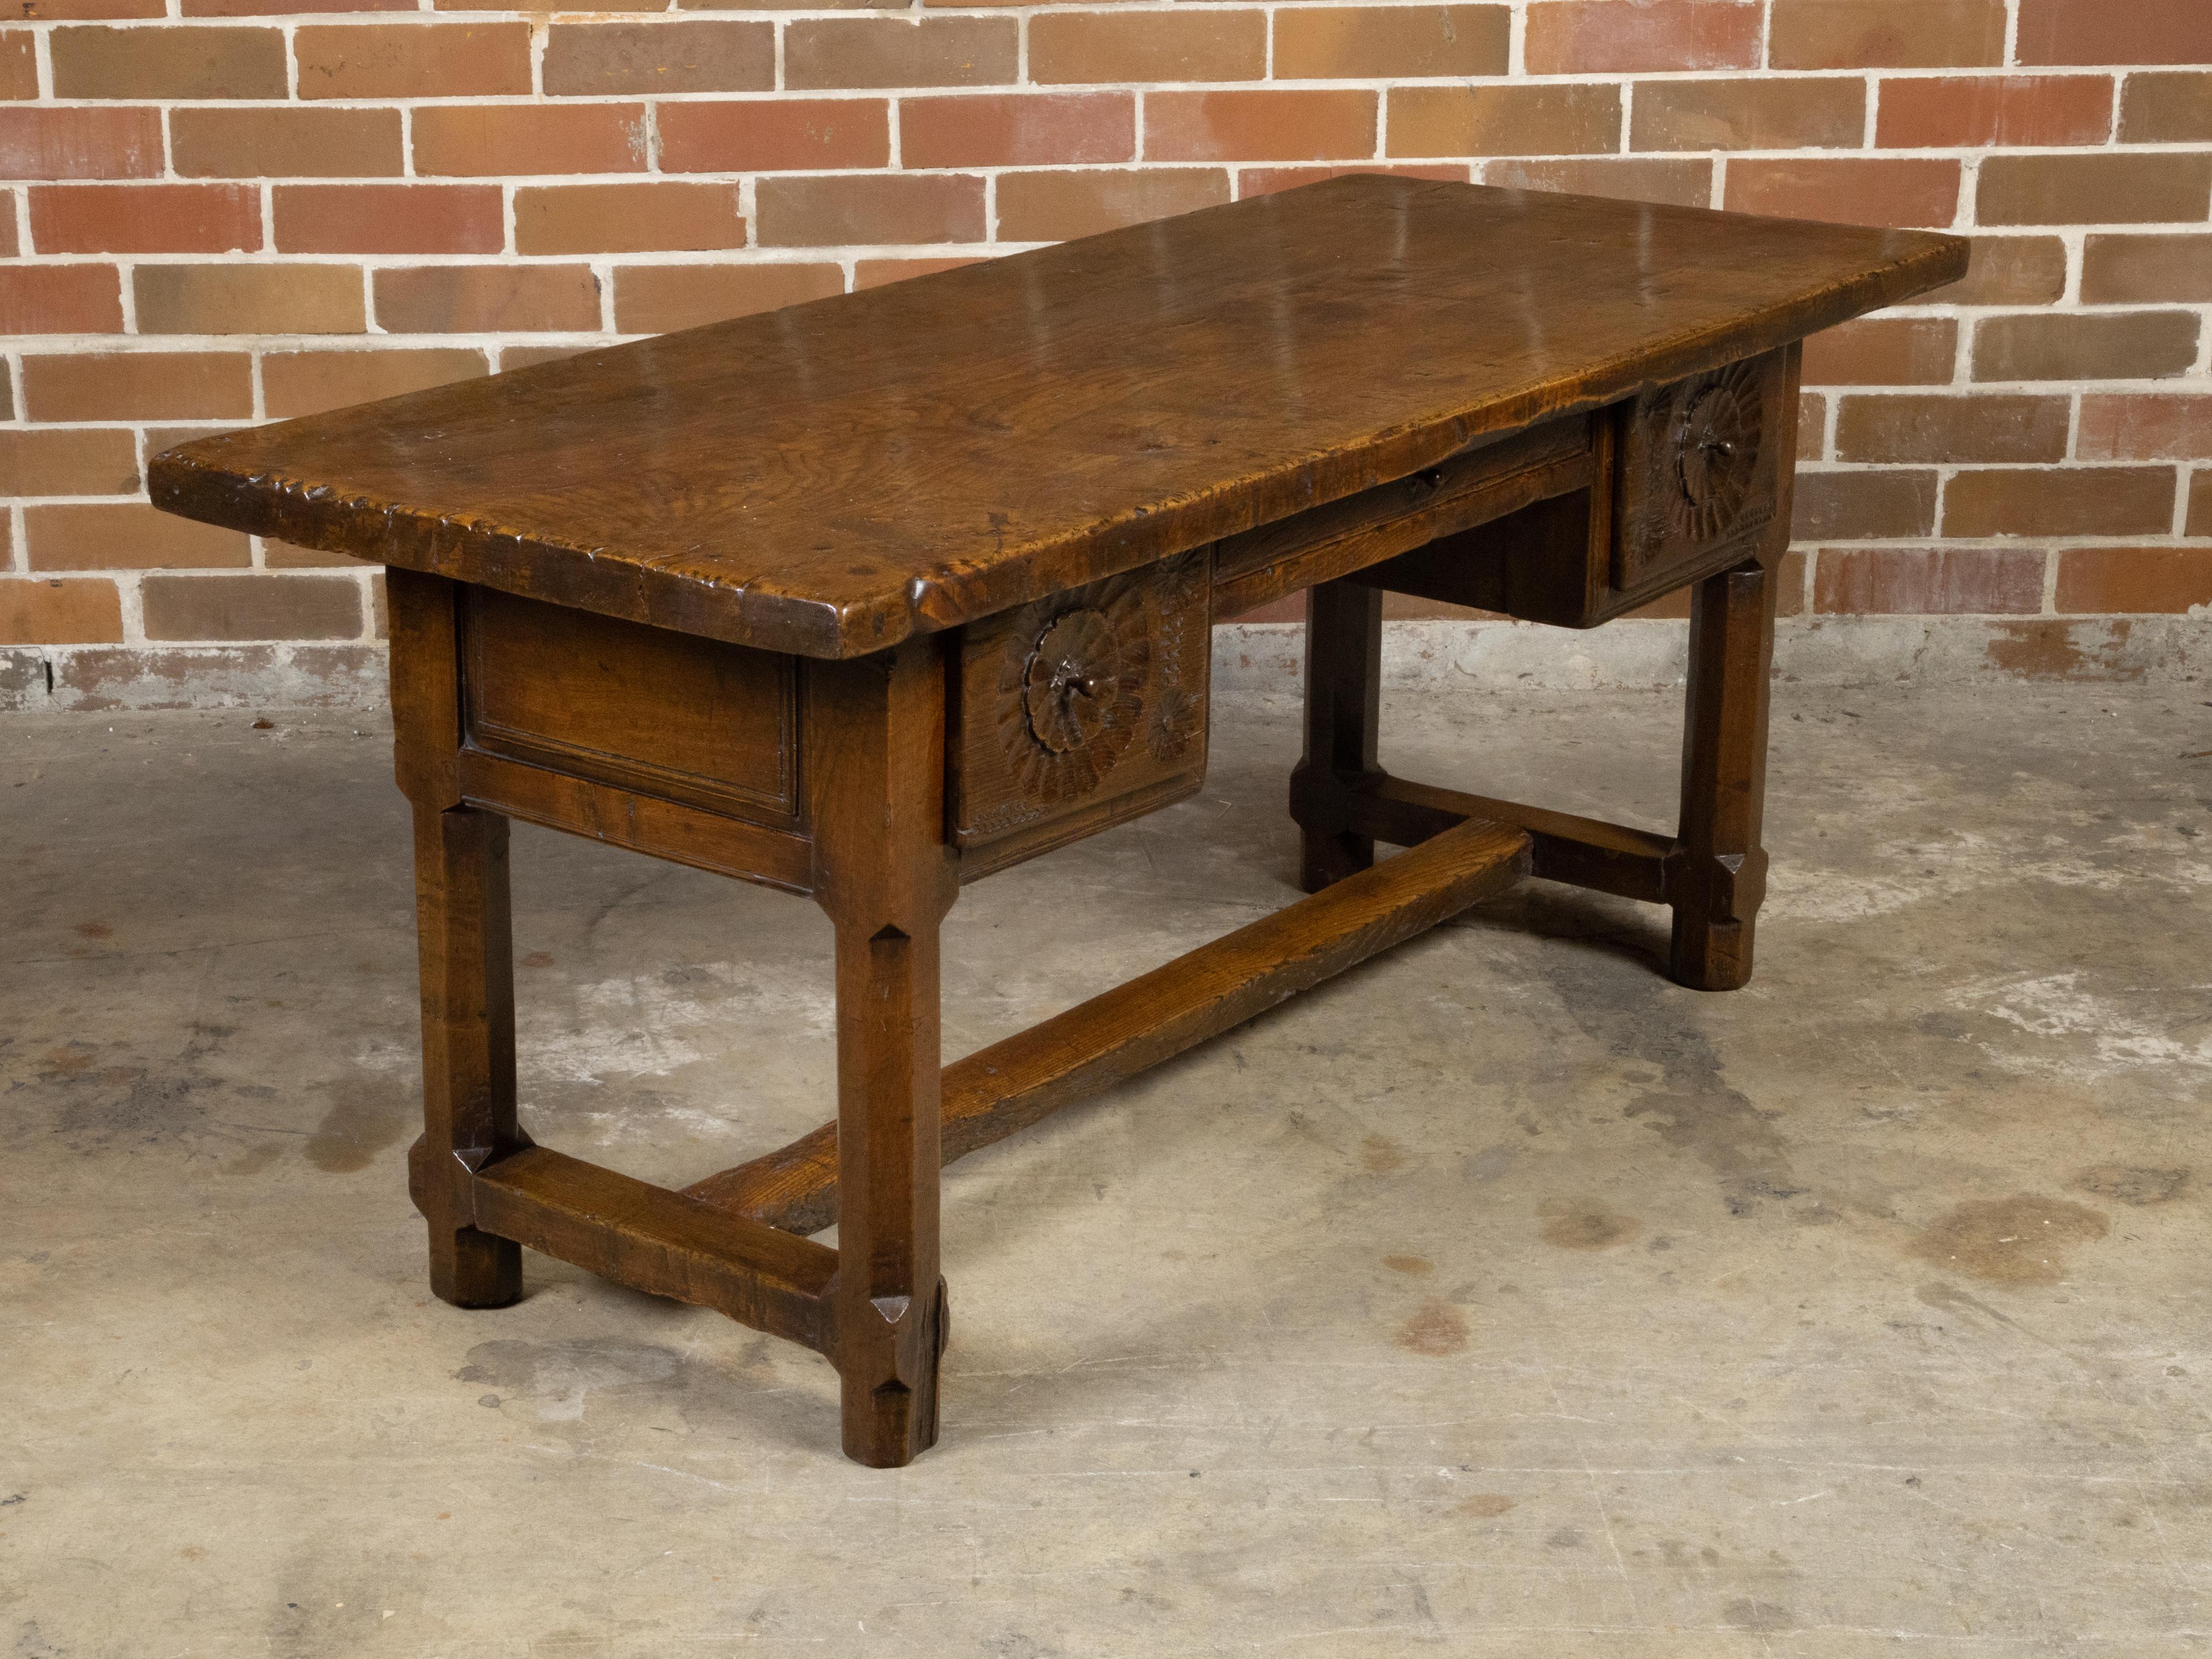 French 1800s Walnut Desk with Three Drawers, Carved Floral Motifs and Patina In Good Condition For Sale In Atlanta, GA